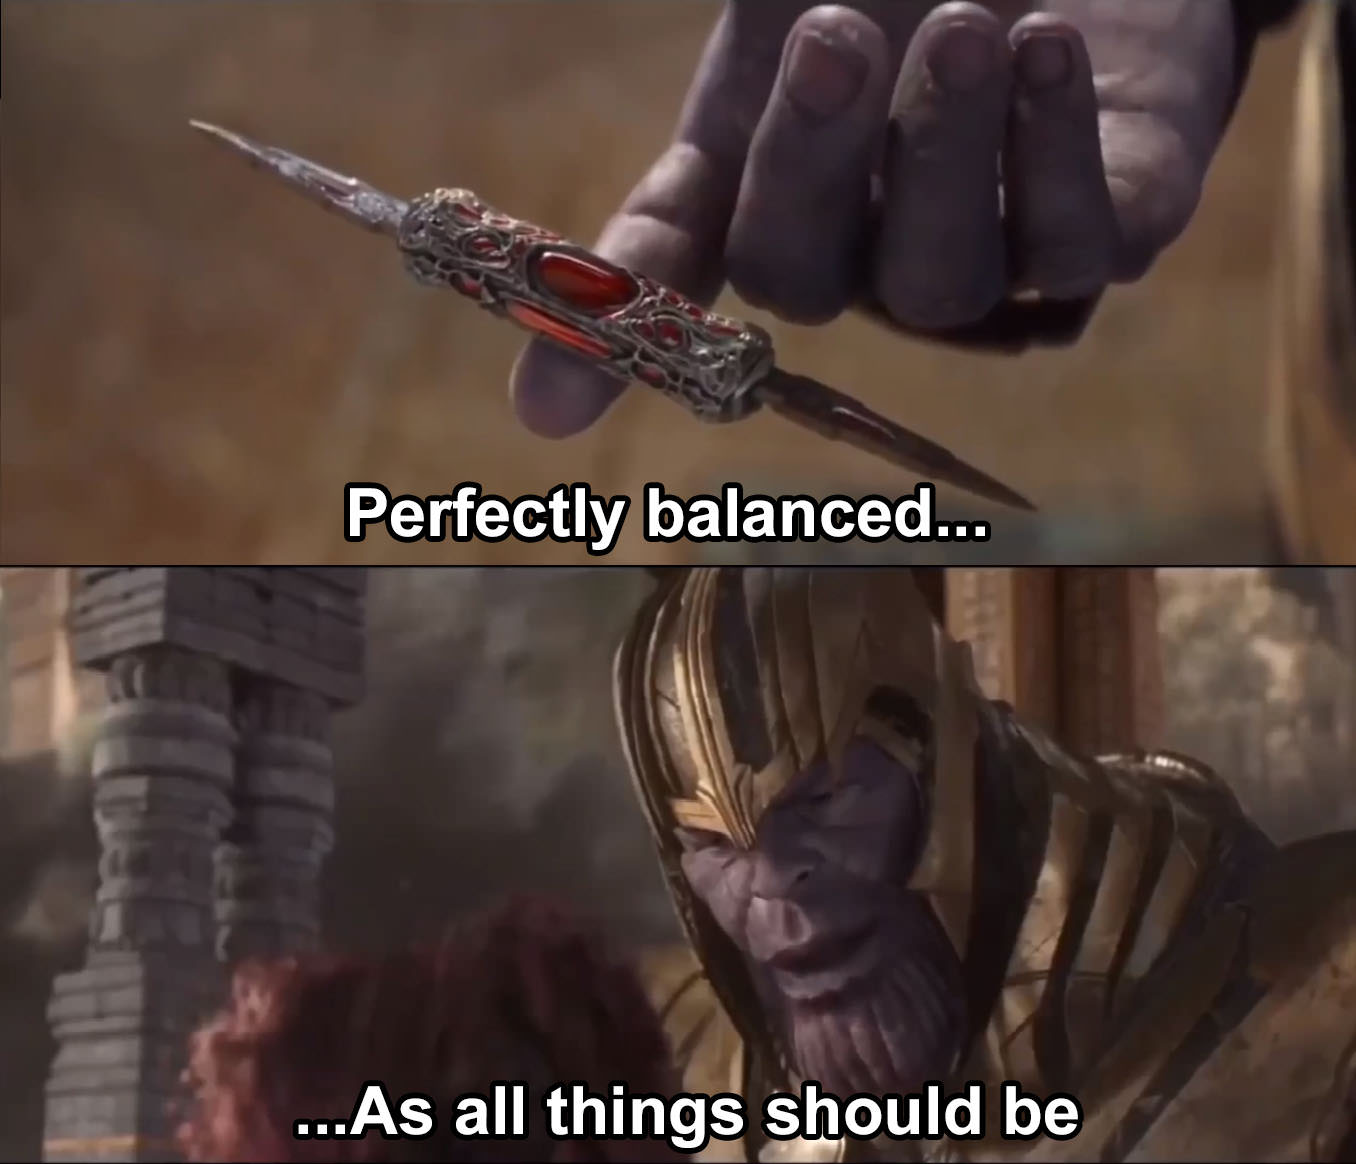 Thanos perfectly balanced as all things should be Meme Generator - Imgflip